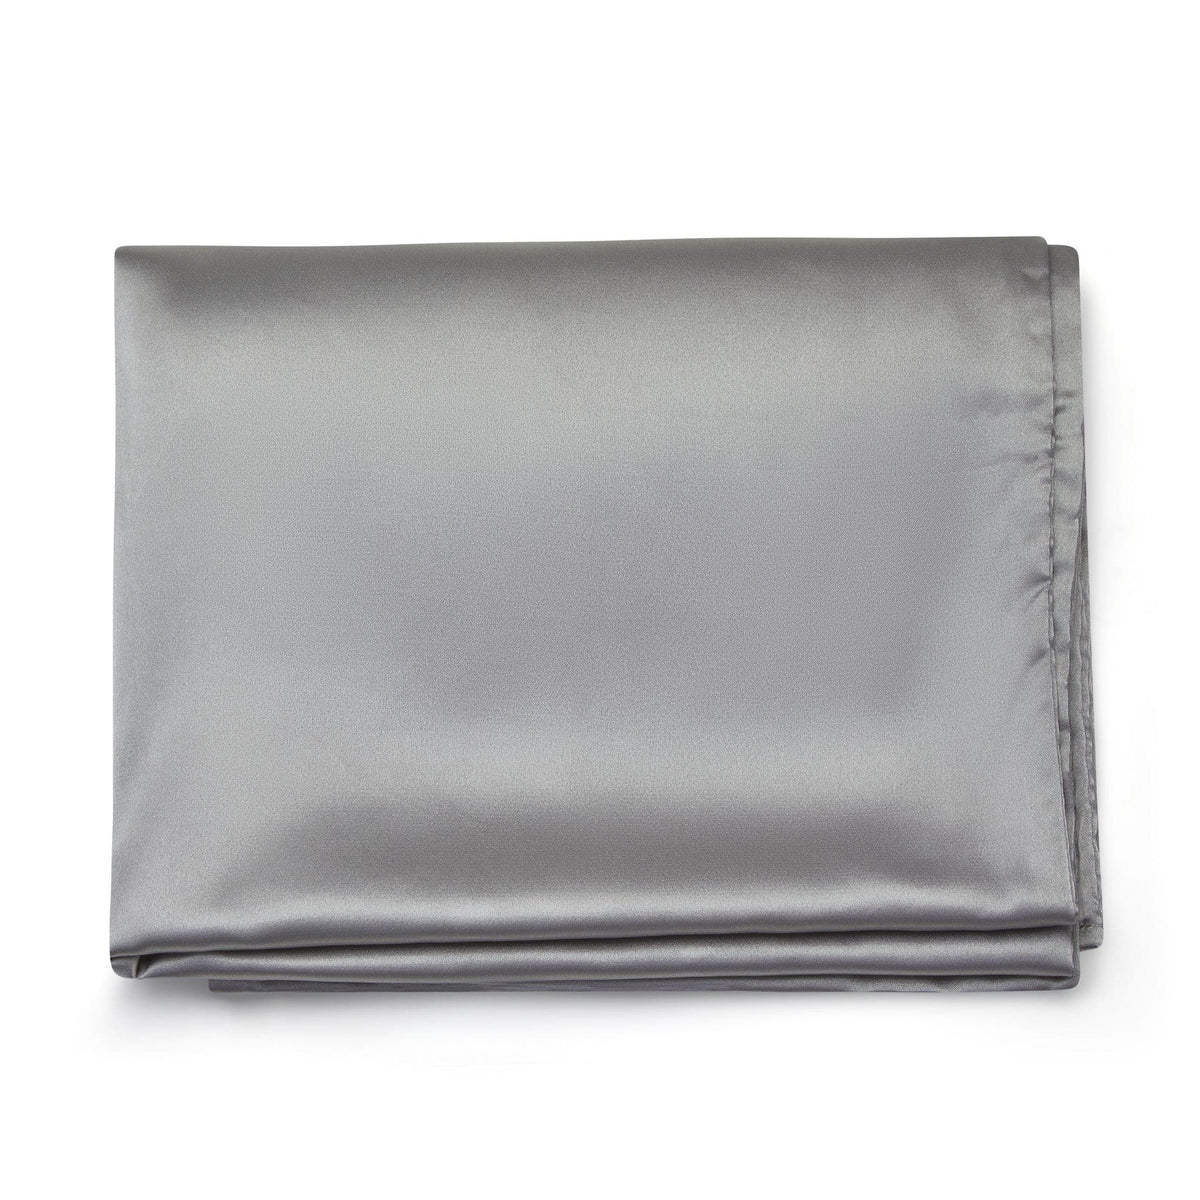 Only Curls Satin Pillowcase - Grey - Only Curls